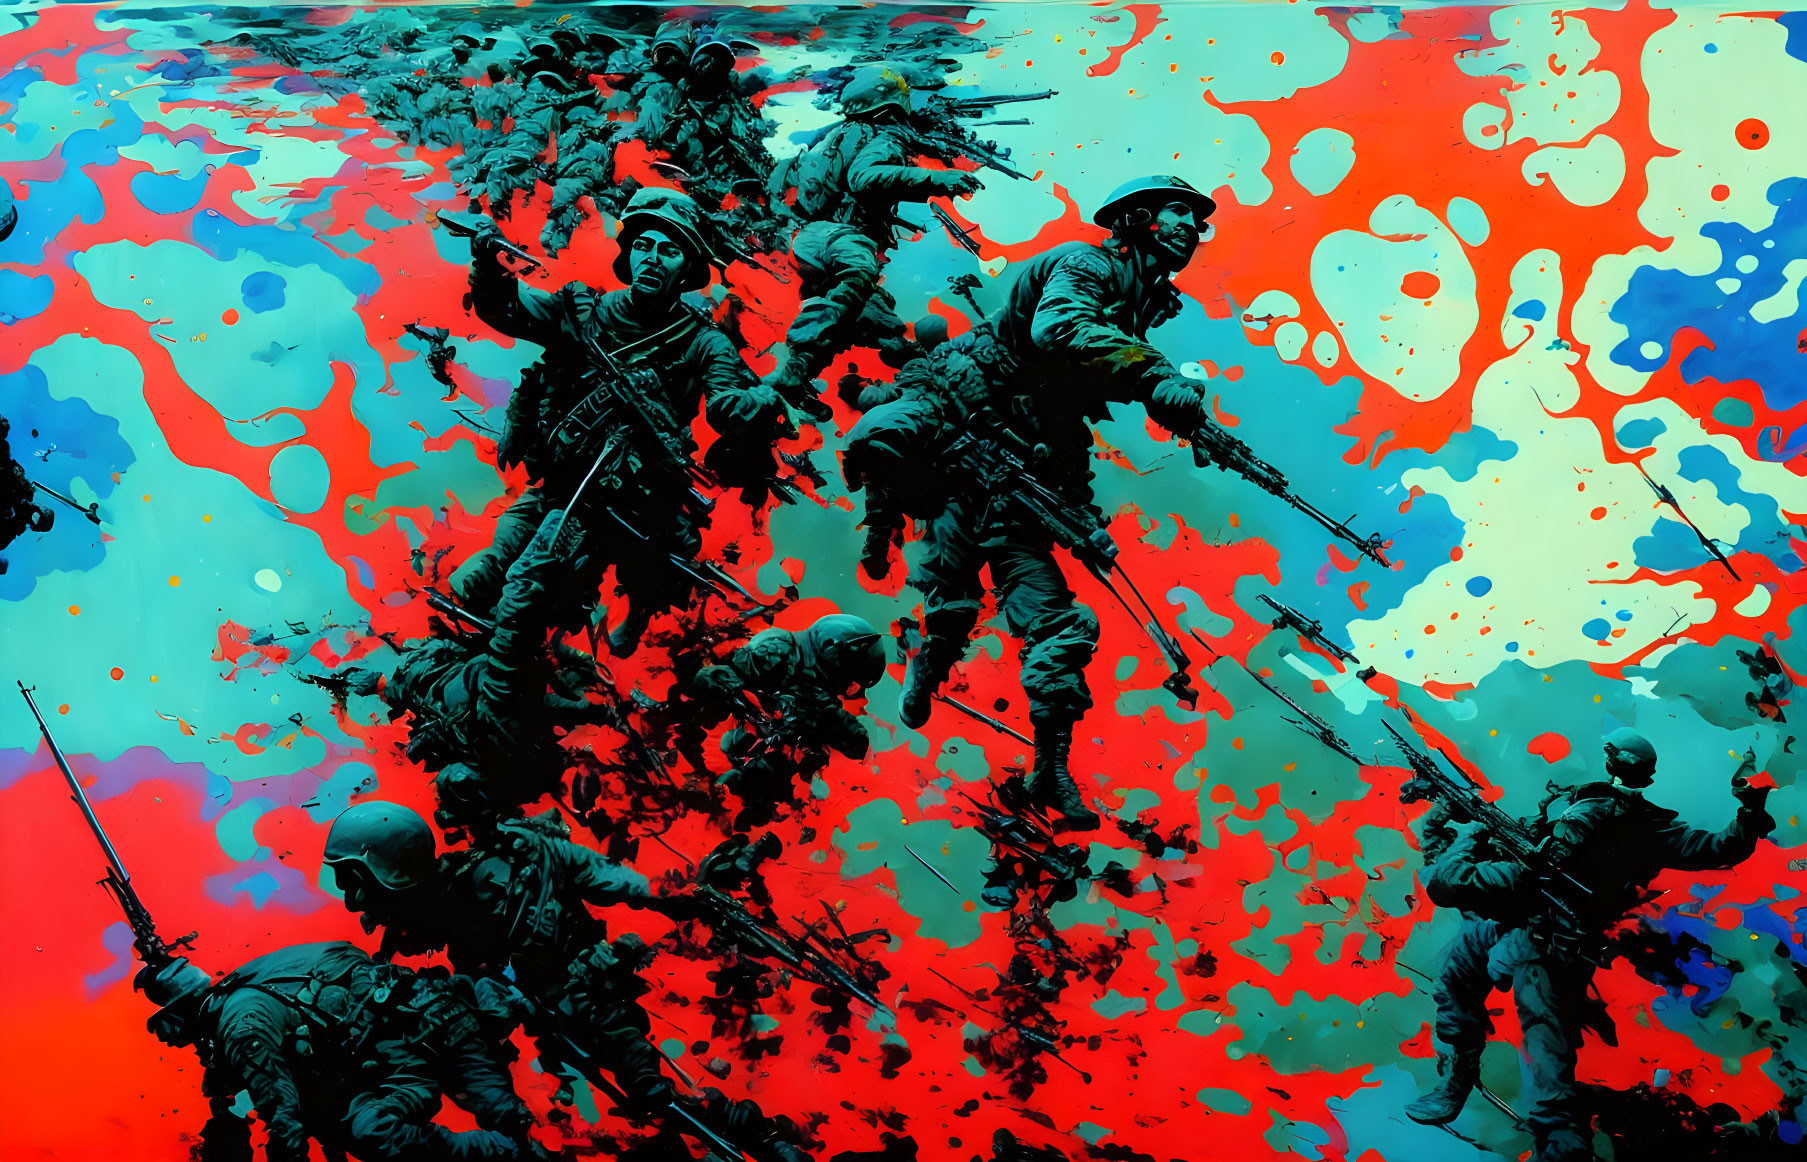 Abstract artwork: Silhouetted soldiers in chaotic red and blue ink splashes